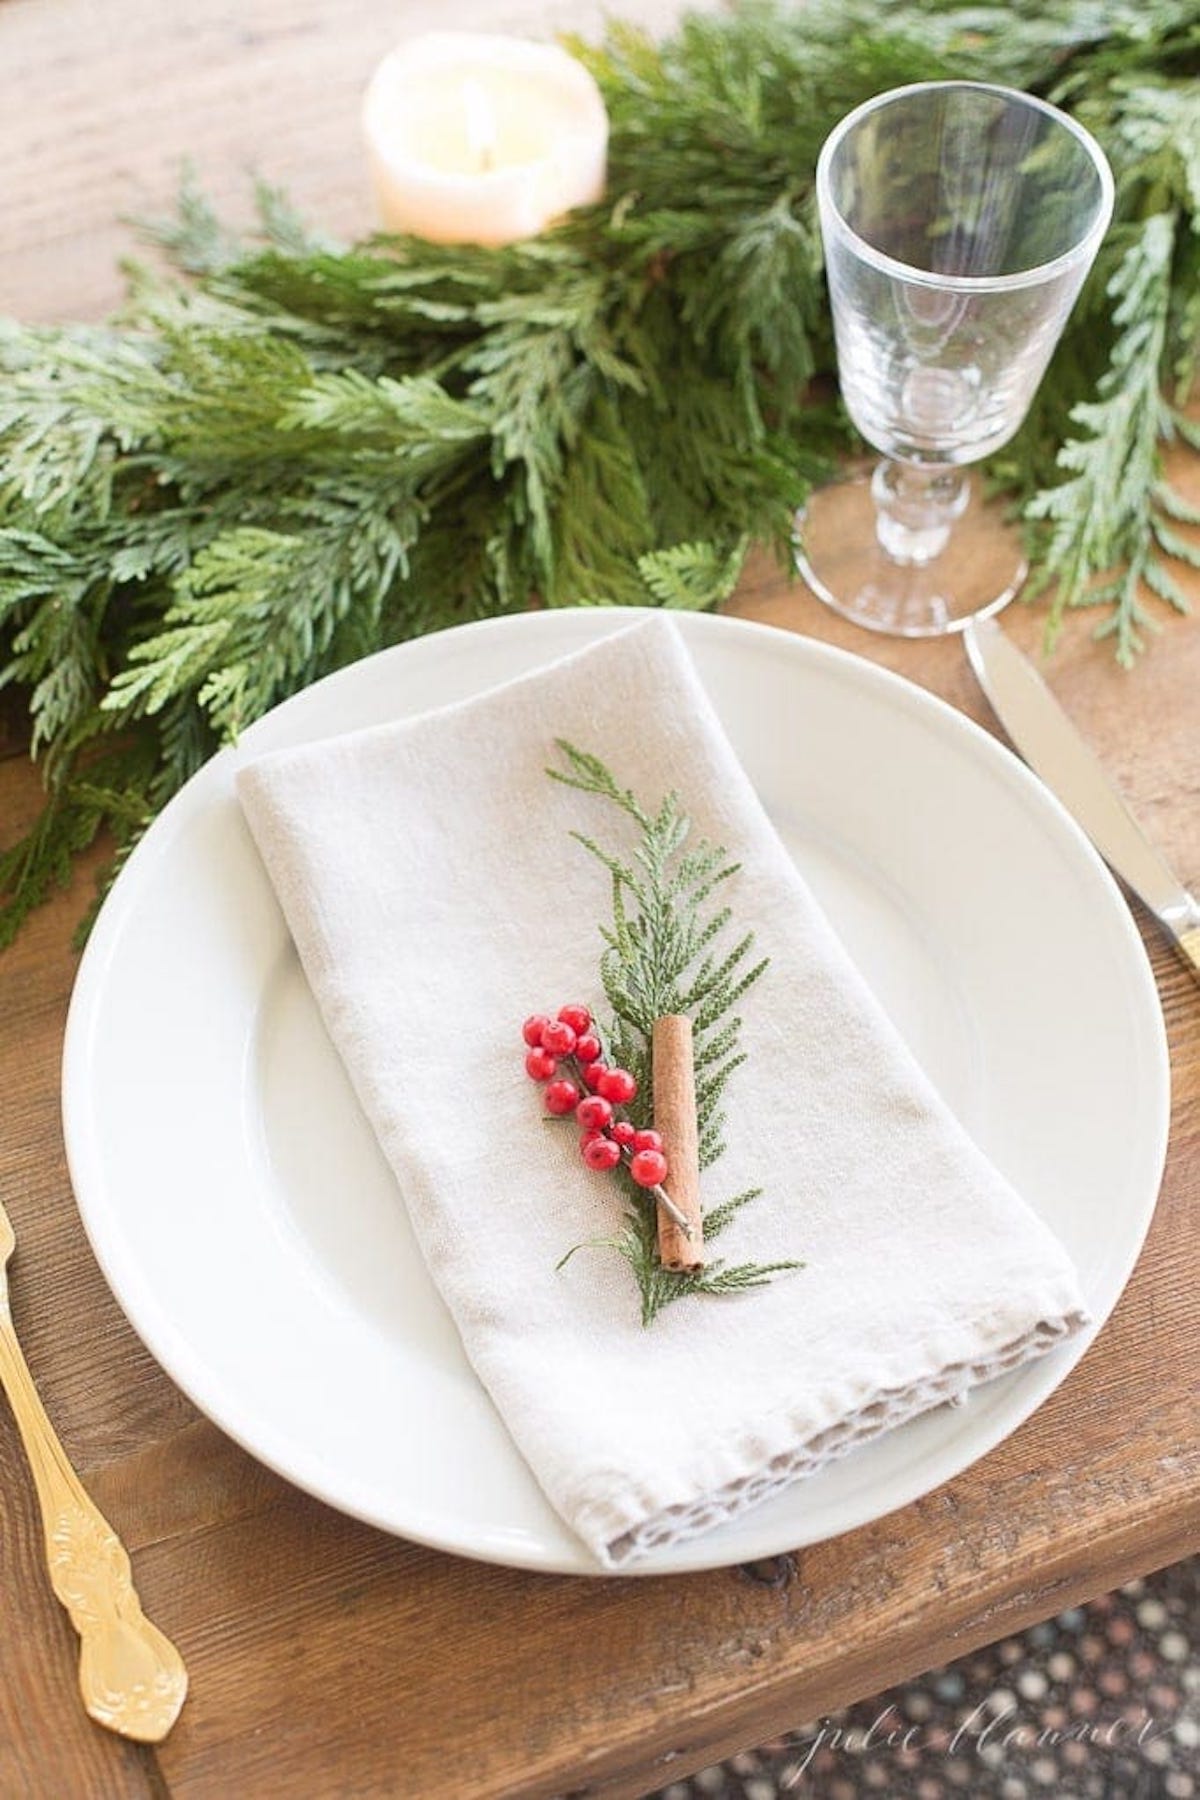 A Christmas table setting with a napkin, fork, and a sprig of holly amidst a garland.